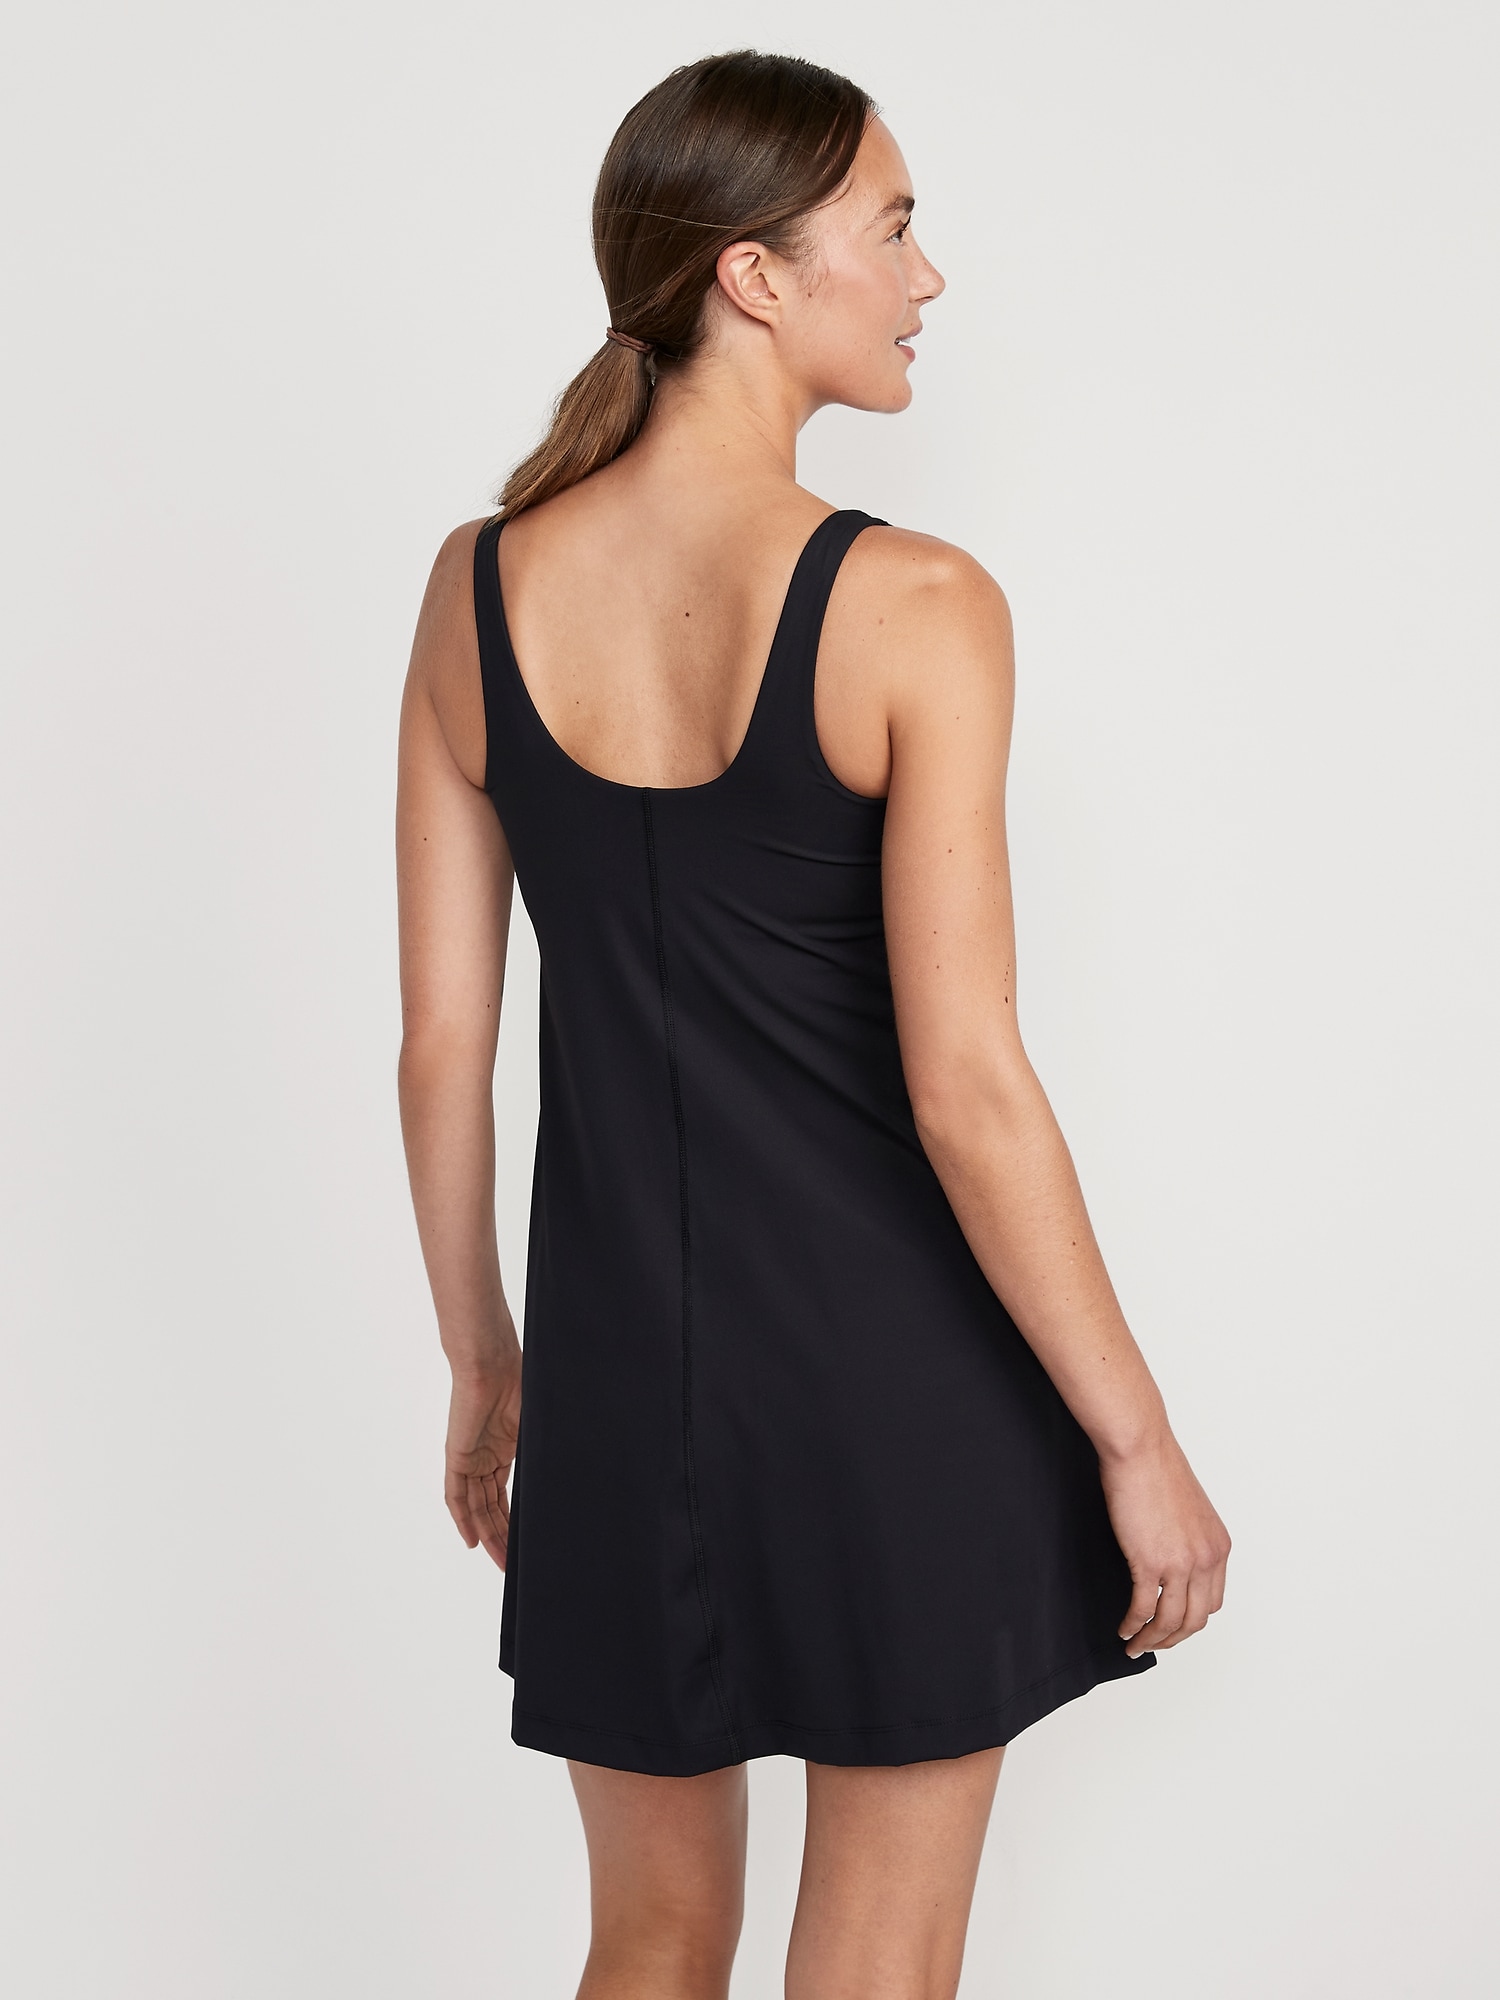 Old Navy PowerSoft Sleeveless Support Dress, Editor Review